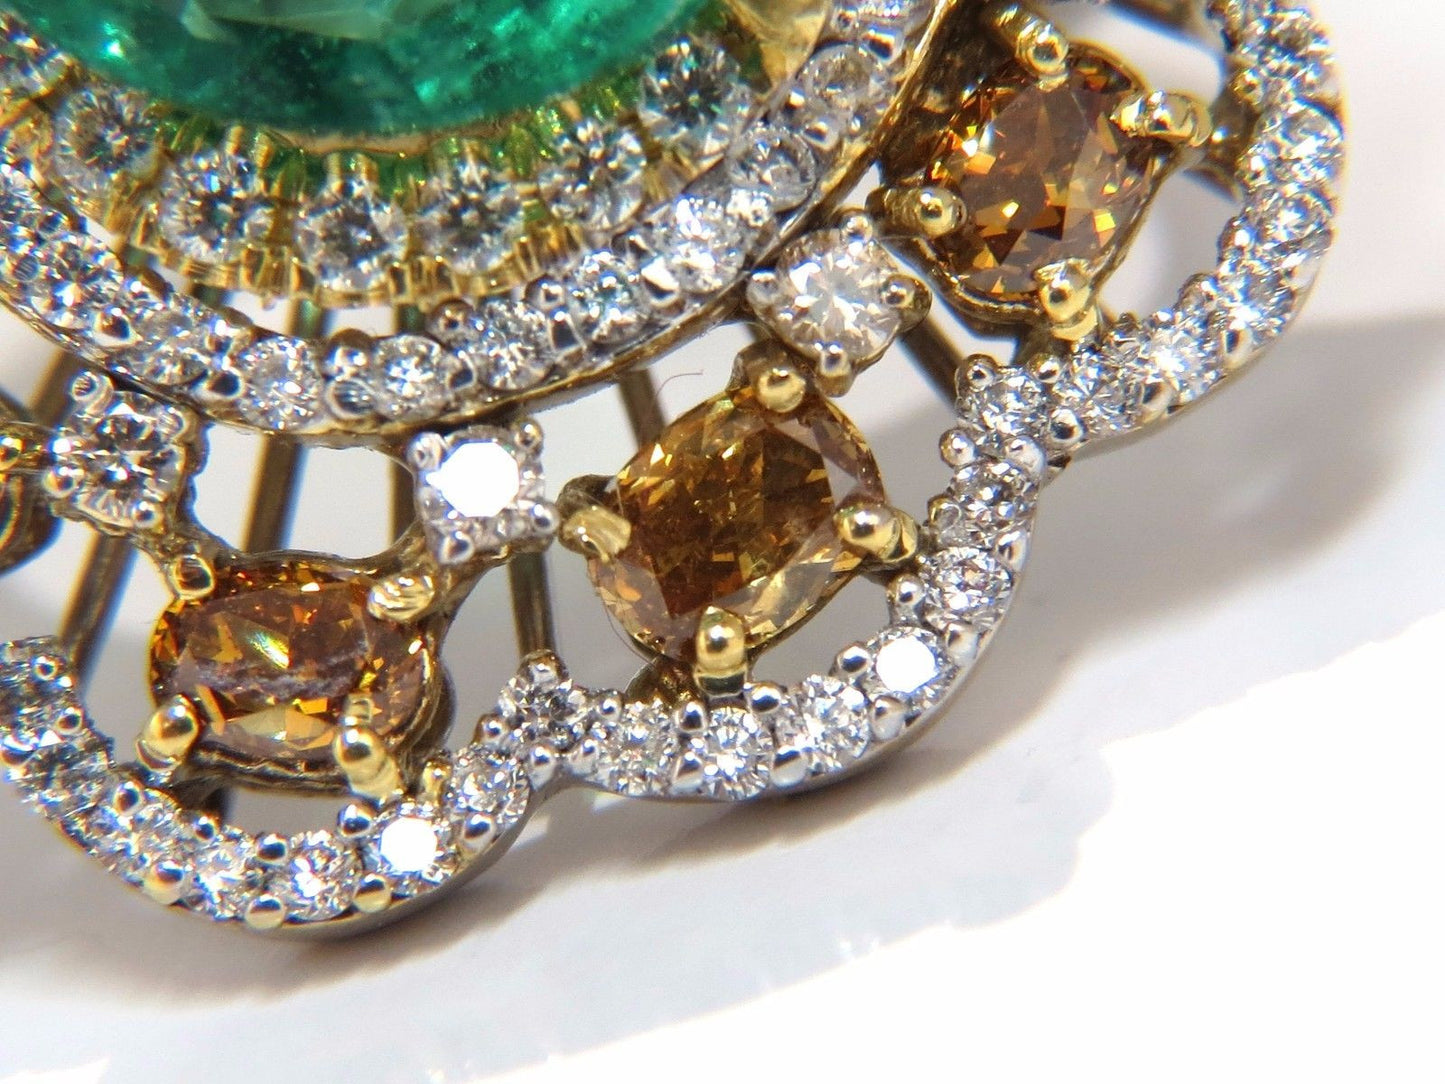 GIA 12.77CT NATURAL EMERALD DIAMONDS RING 18KT VIVID GREEN & FANCY COLORS